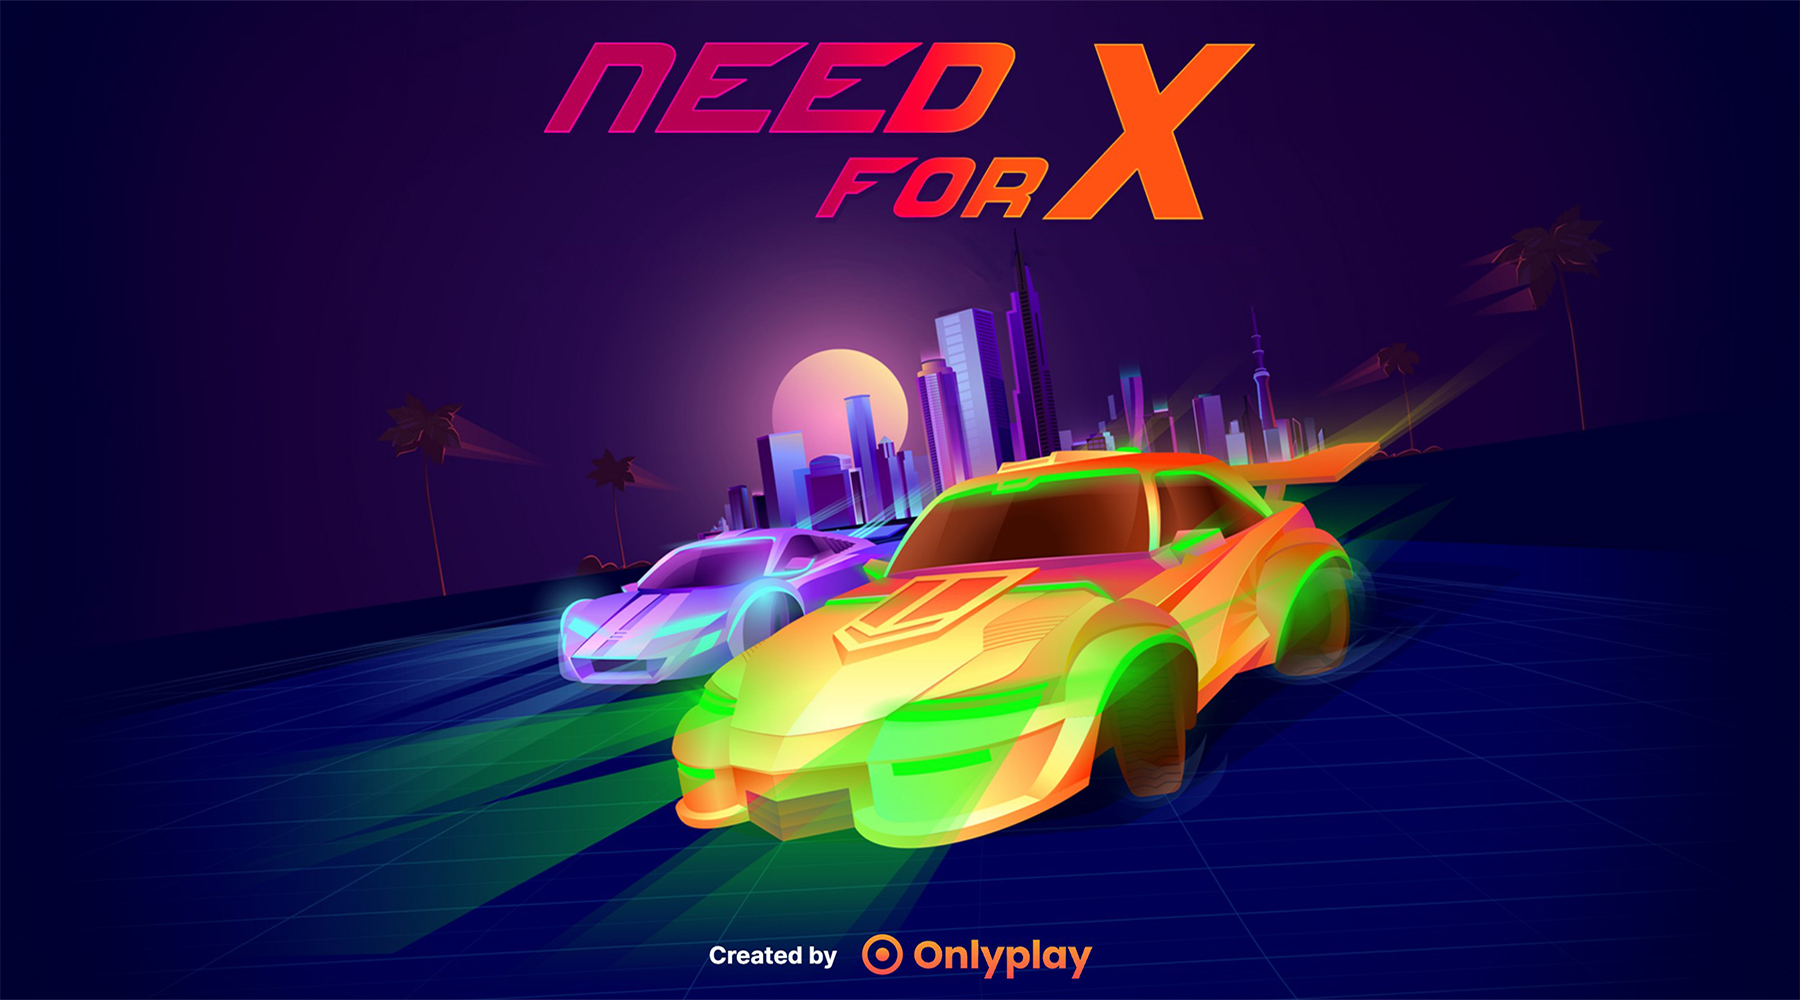 Need For X by OnlyPlay